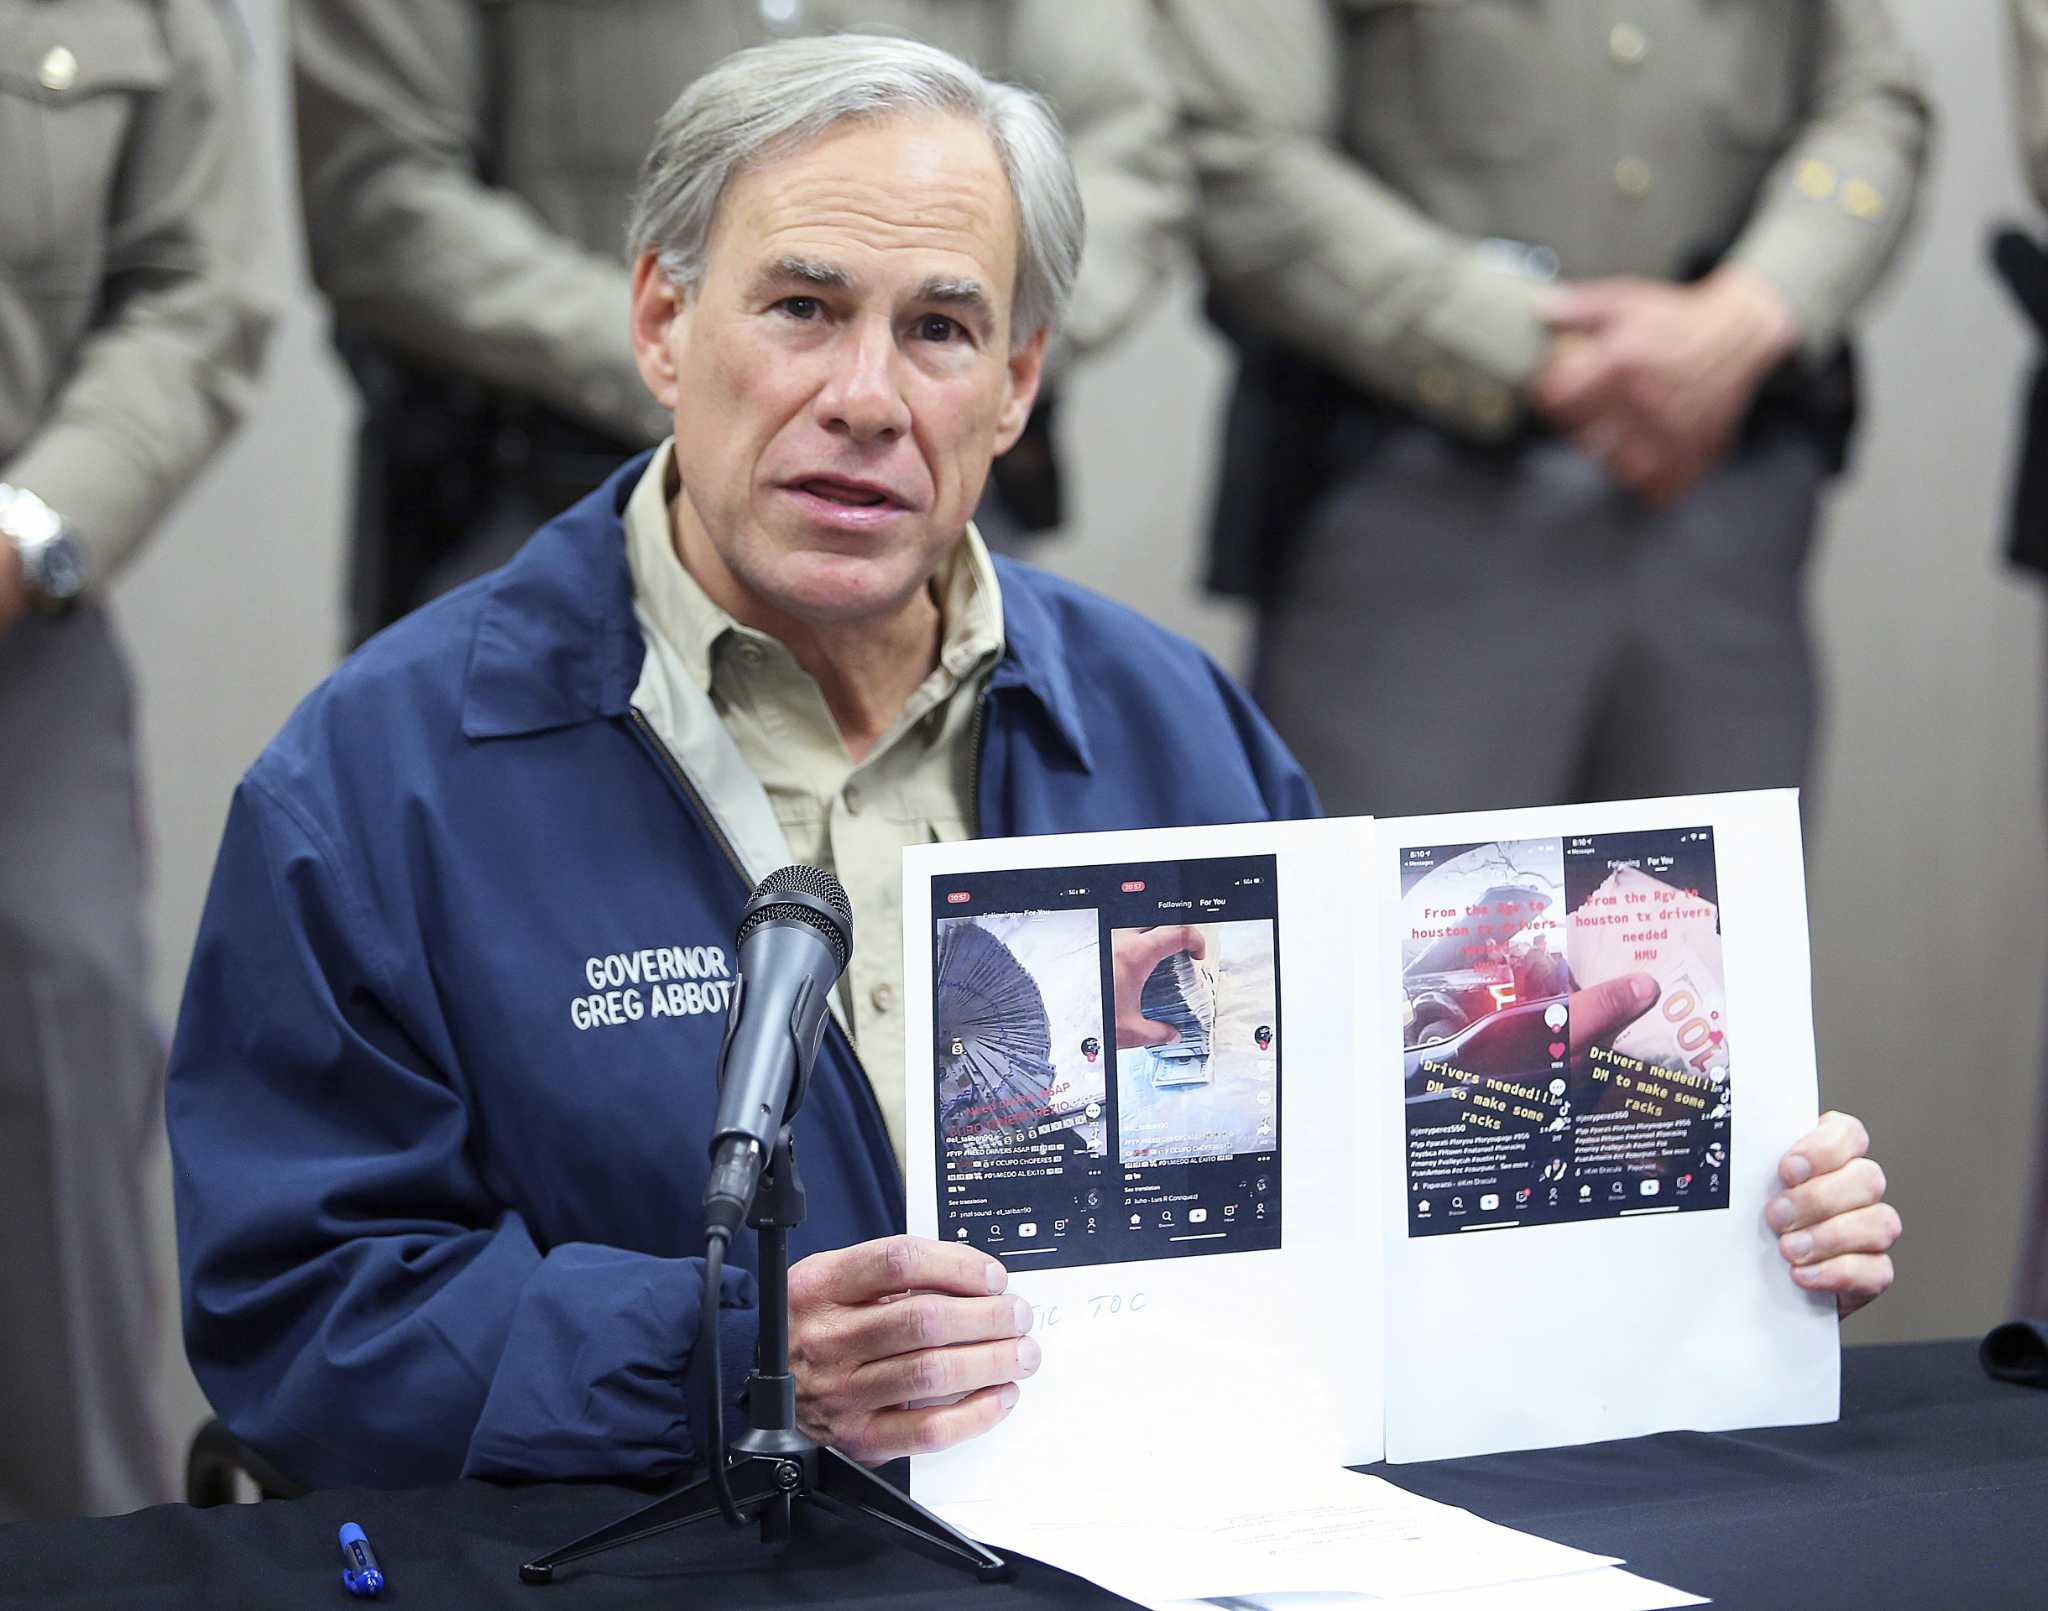 Greg Abbott - Thanks to these Texas Rangers and Dept. of Public